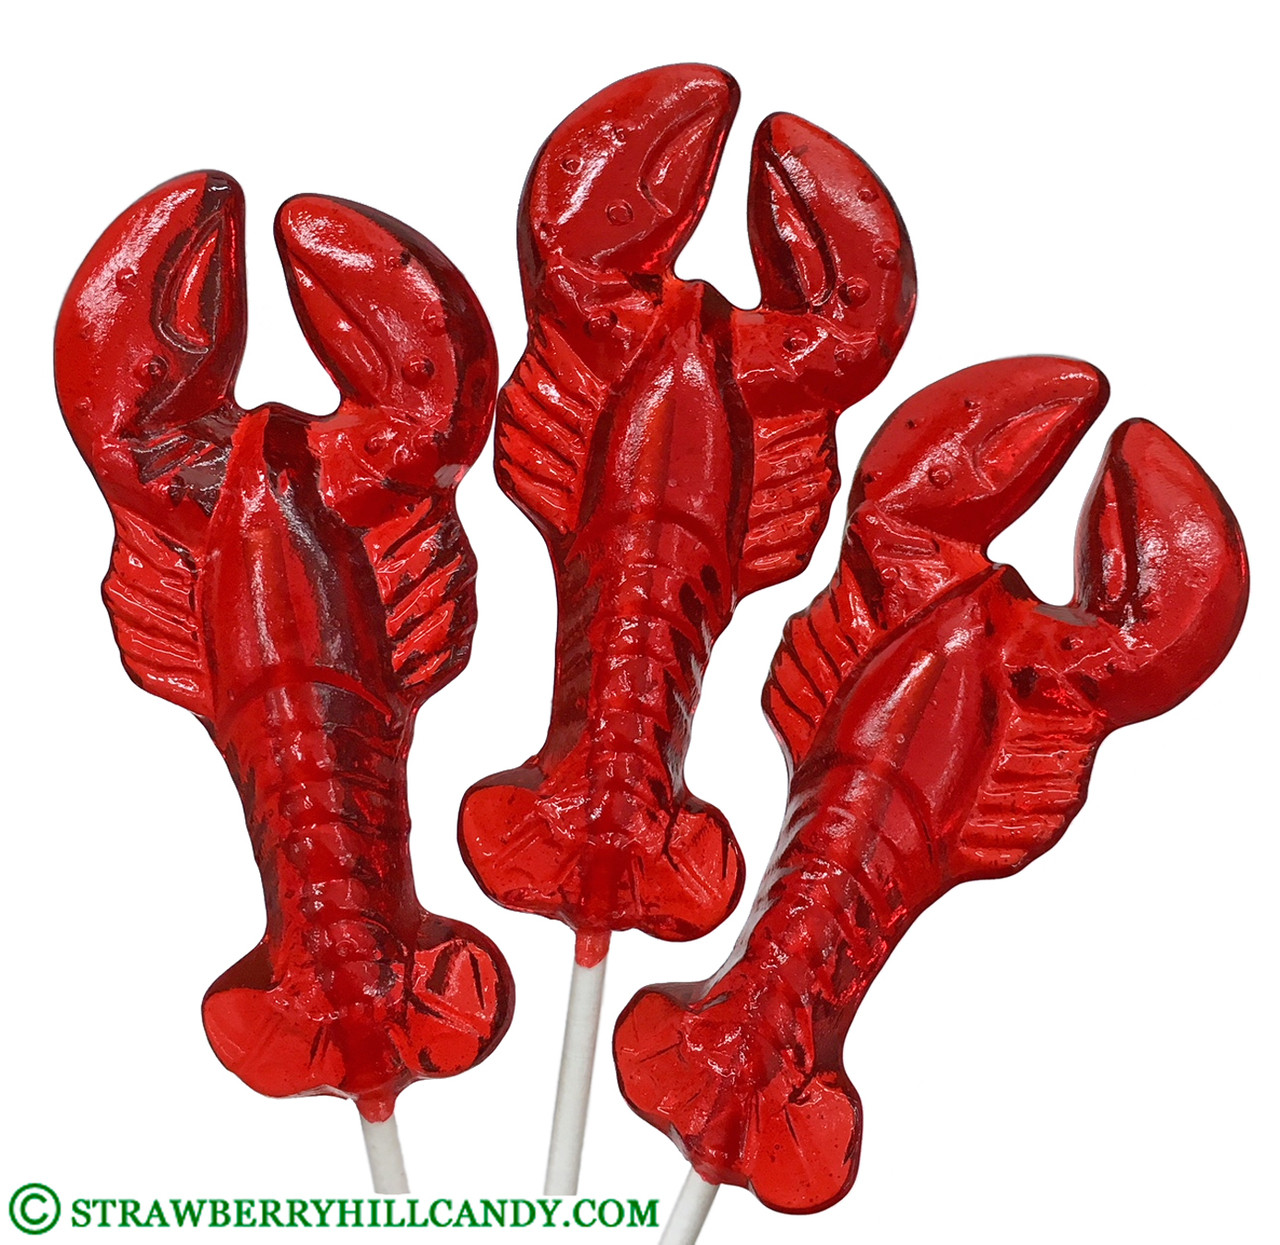 Jumbo Lobster 35319 1.3 oz Lollipop Strawberry, 25 Count - Pack of 8